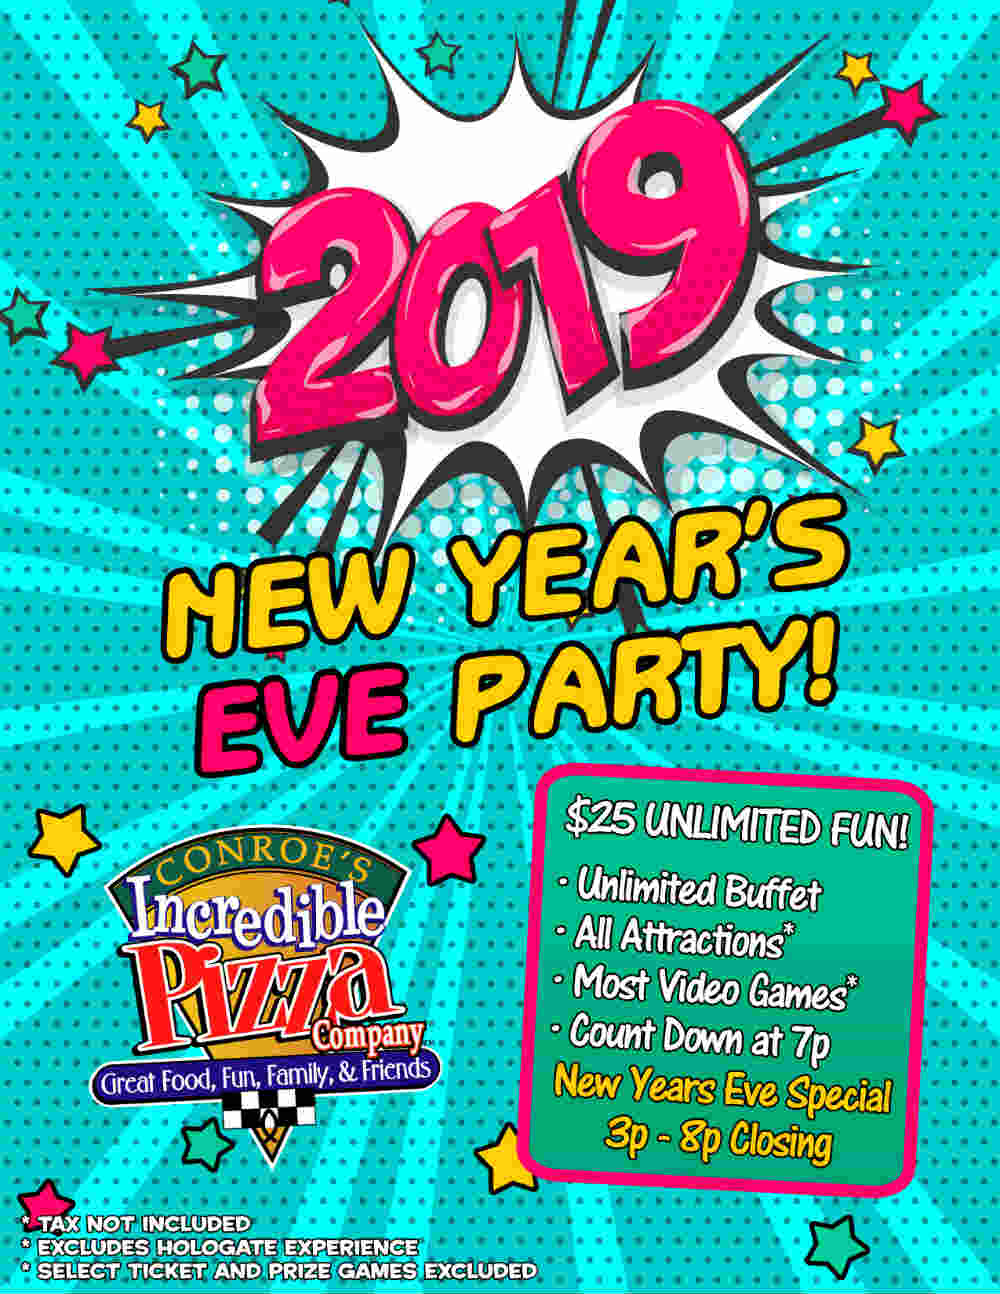 New Years Eve Event Flyers & Posters - Start Creating NYE